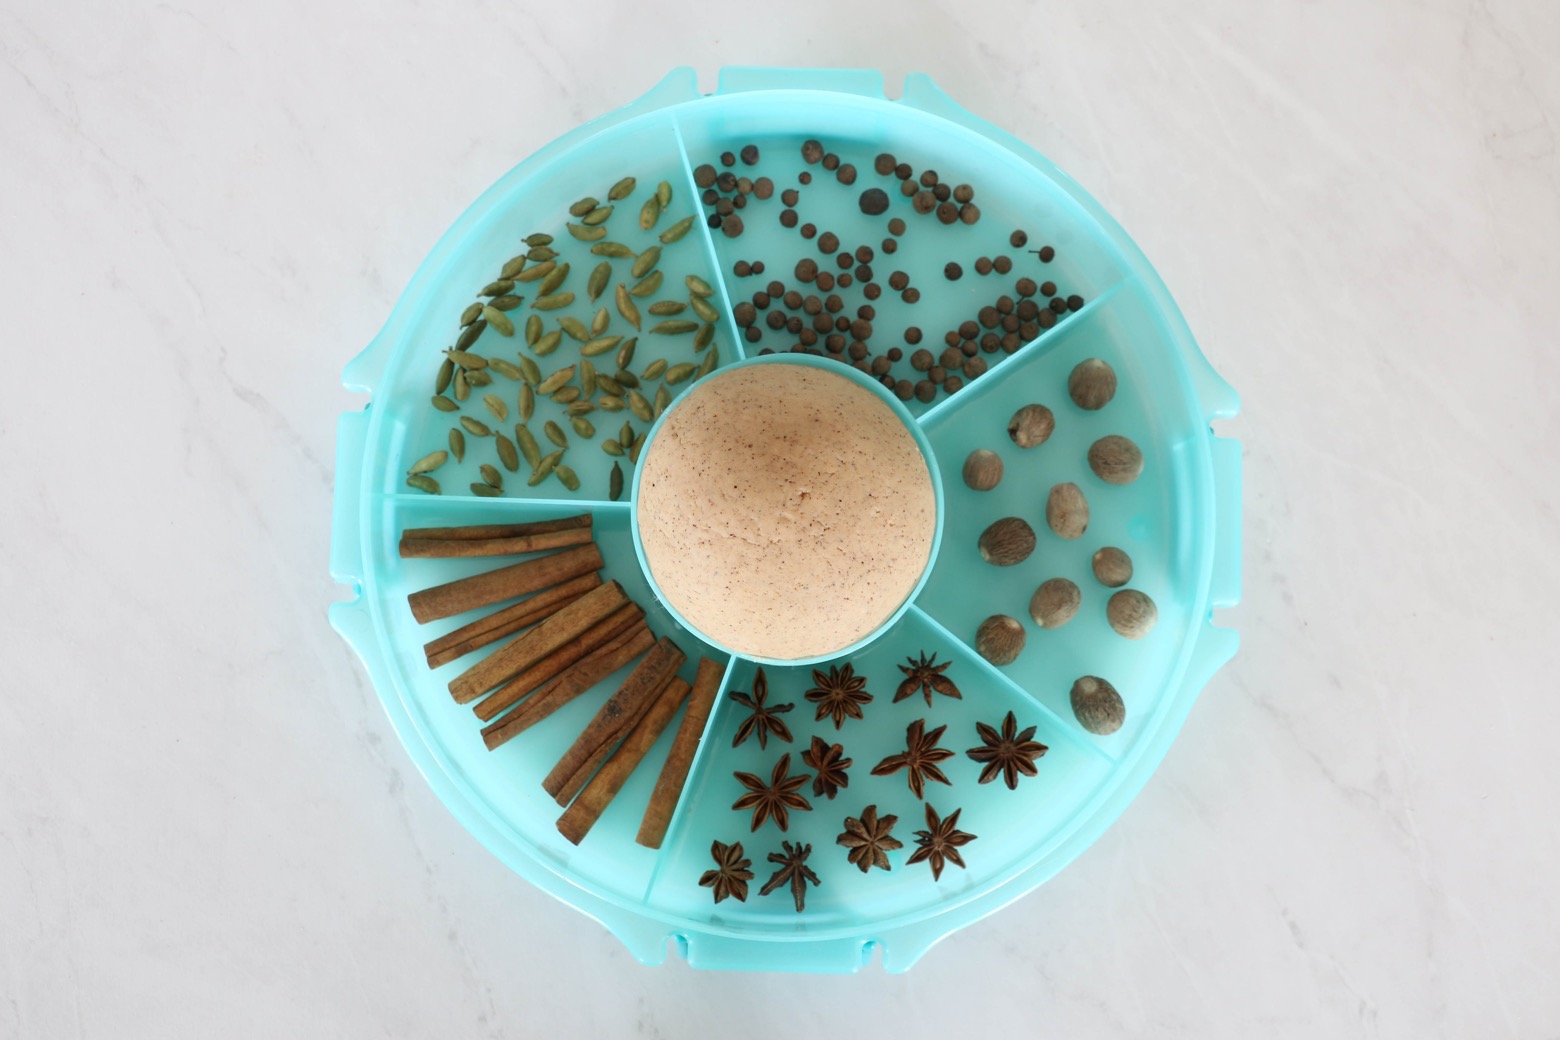 Autumn Spice Play Dough with Whole Spices